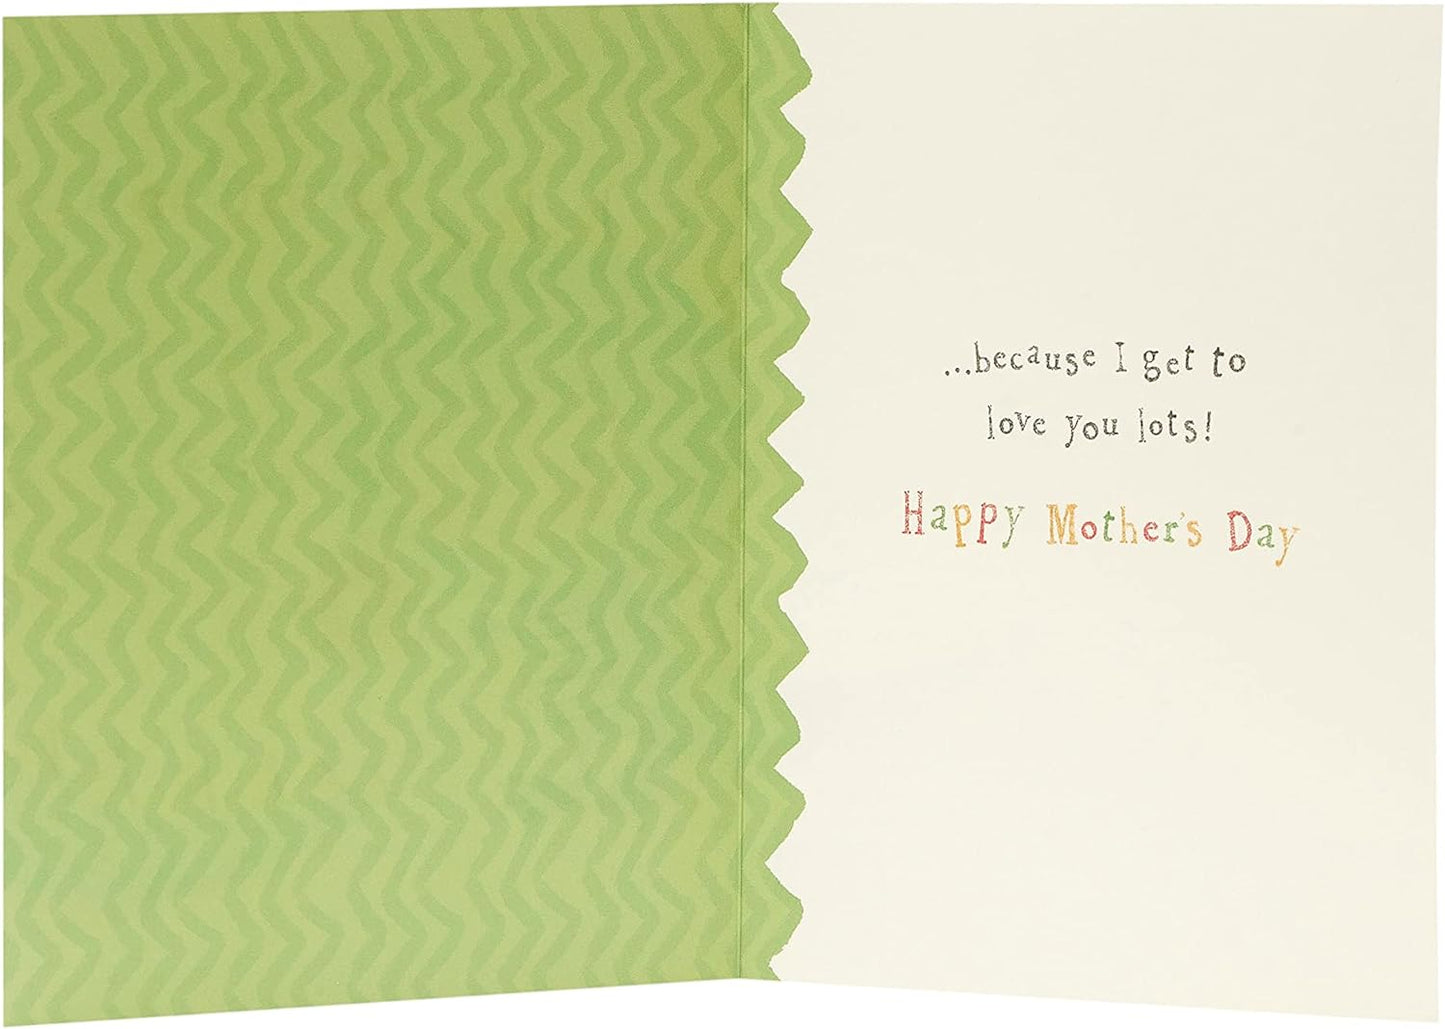 Sweet Dinosaur Design Mother's Day Card From Grandson